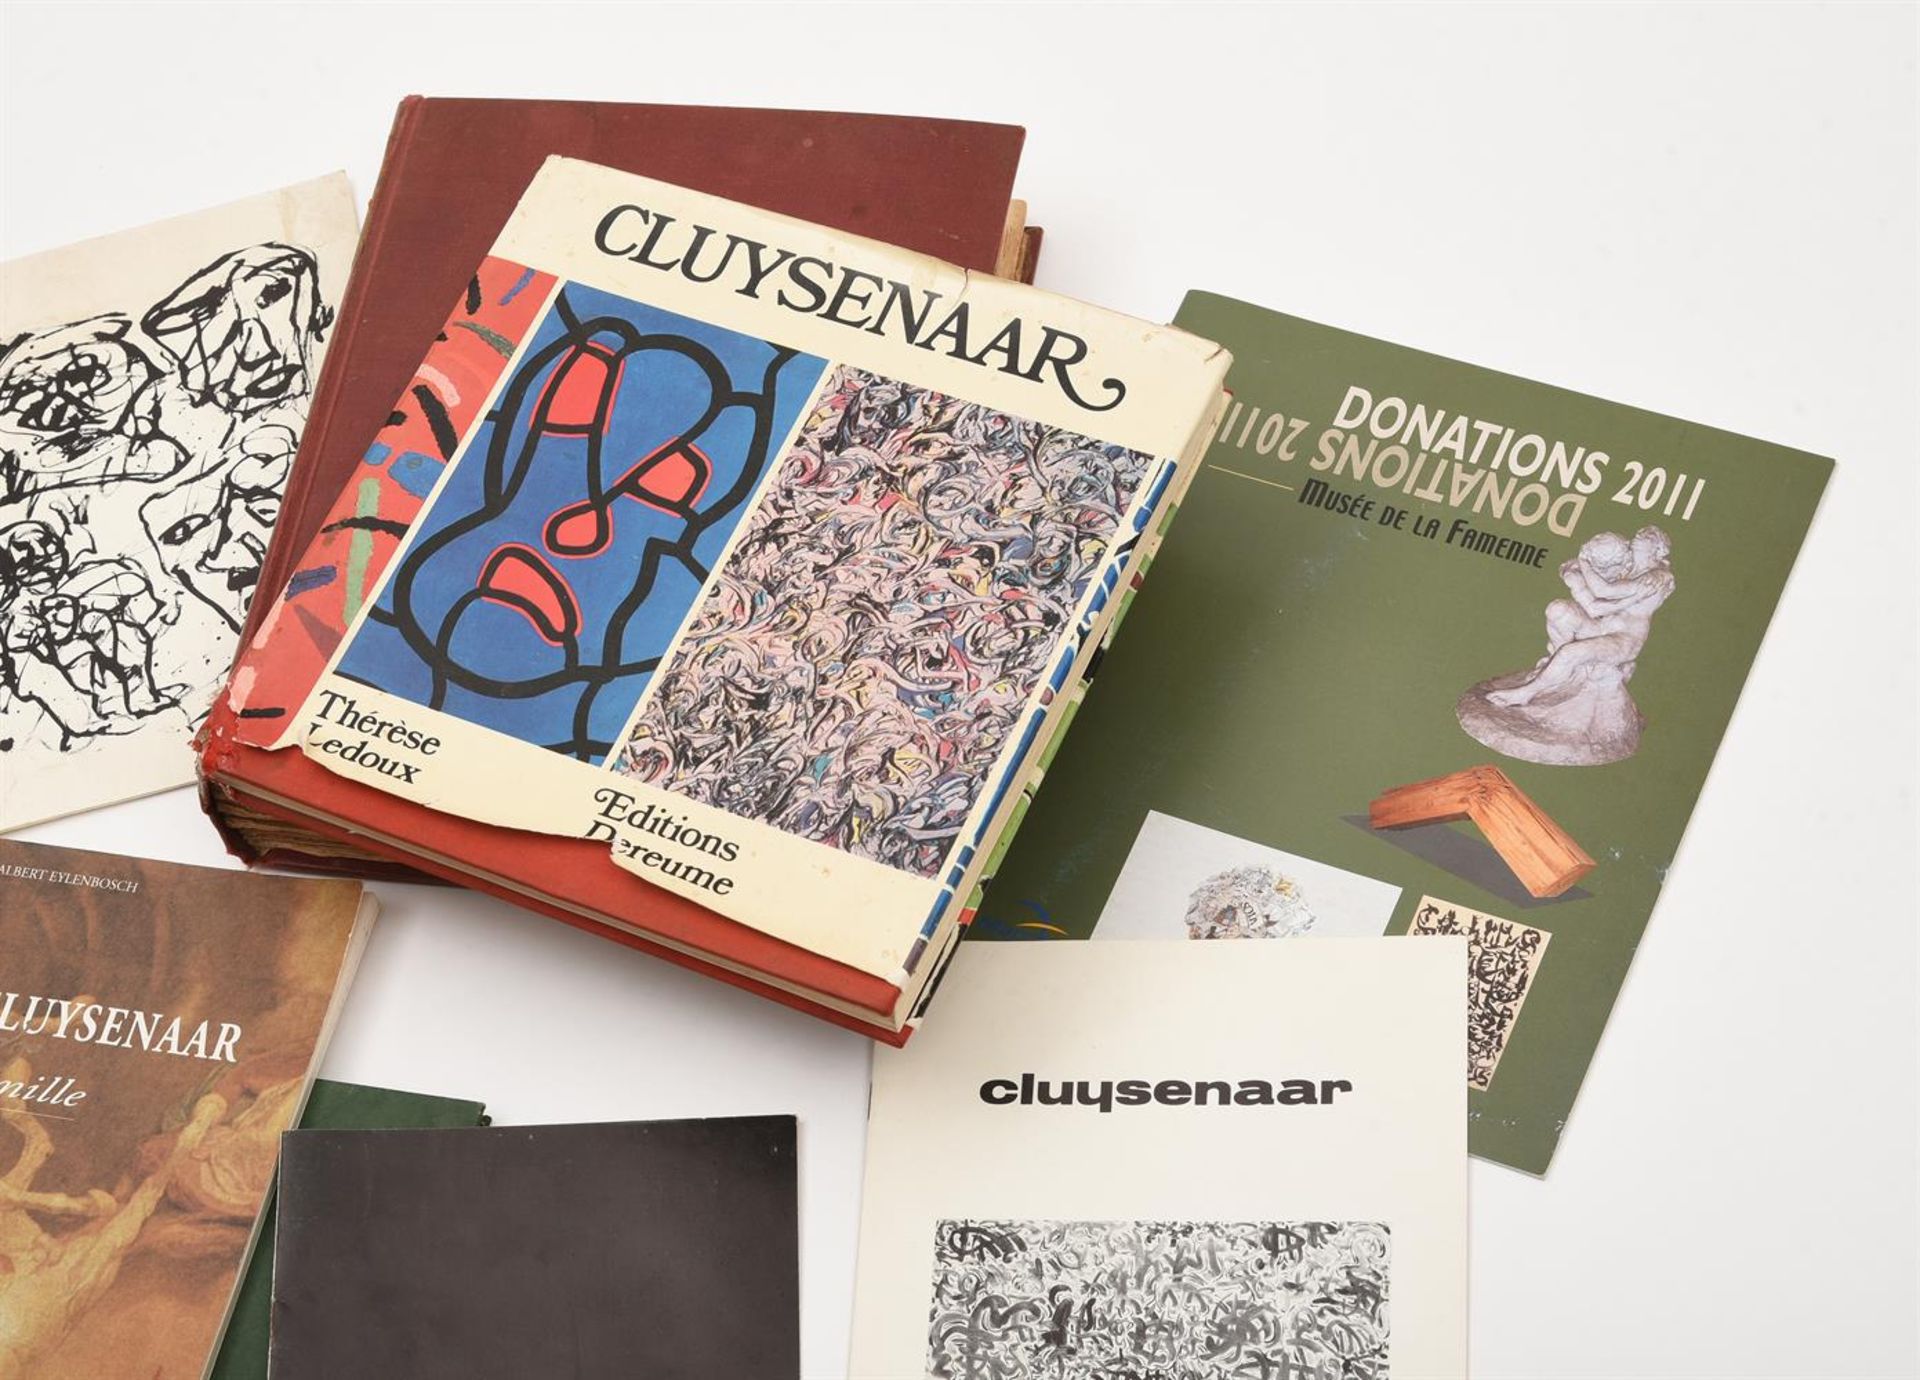 A GROUP OF EXHIBITION LEAFLETS AND BOOKS RELATING TO THE CLUYSENAAR FAMILY - Image 2 of 3